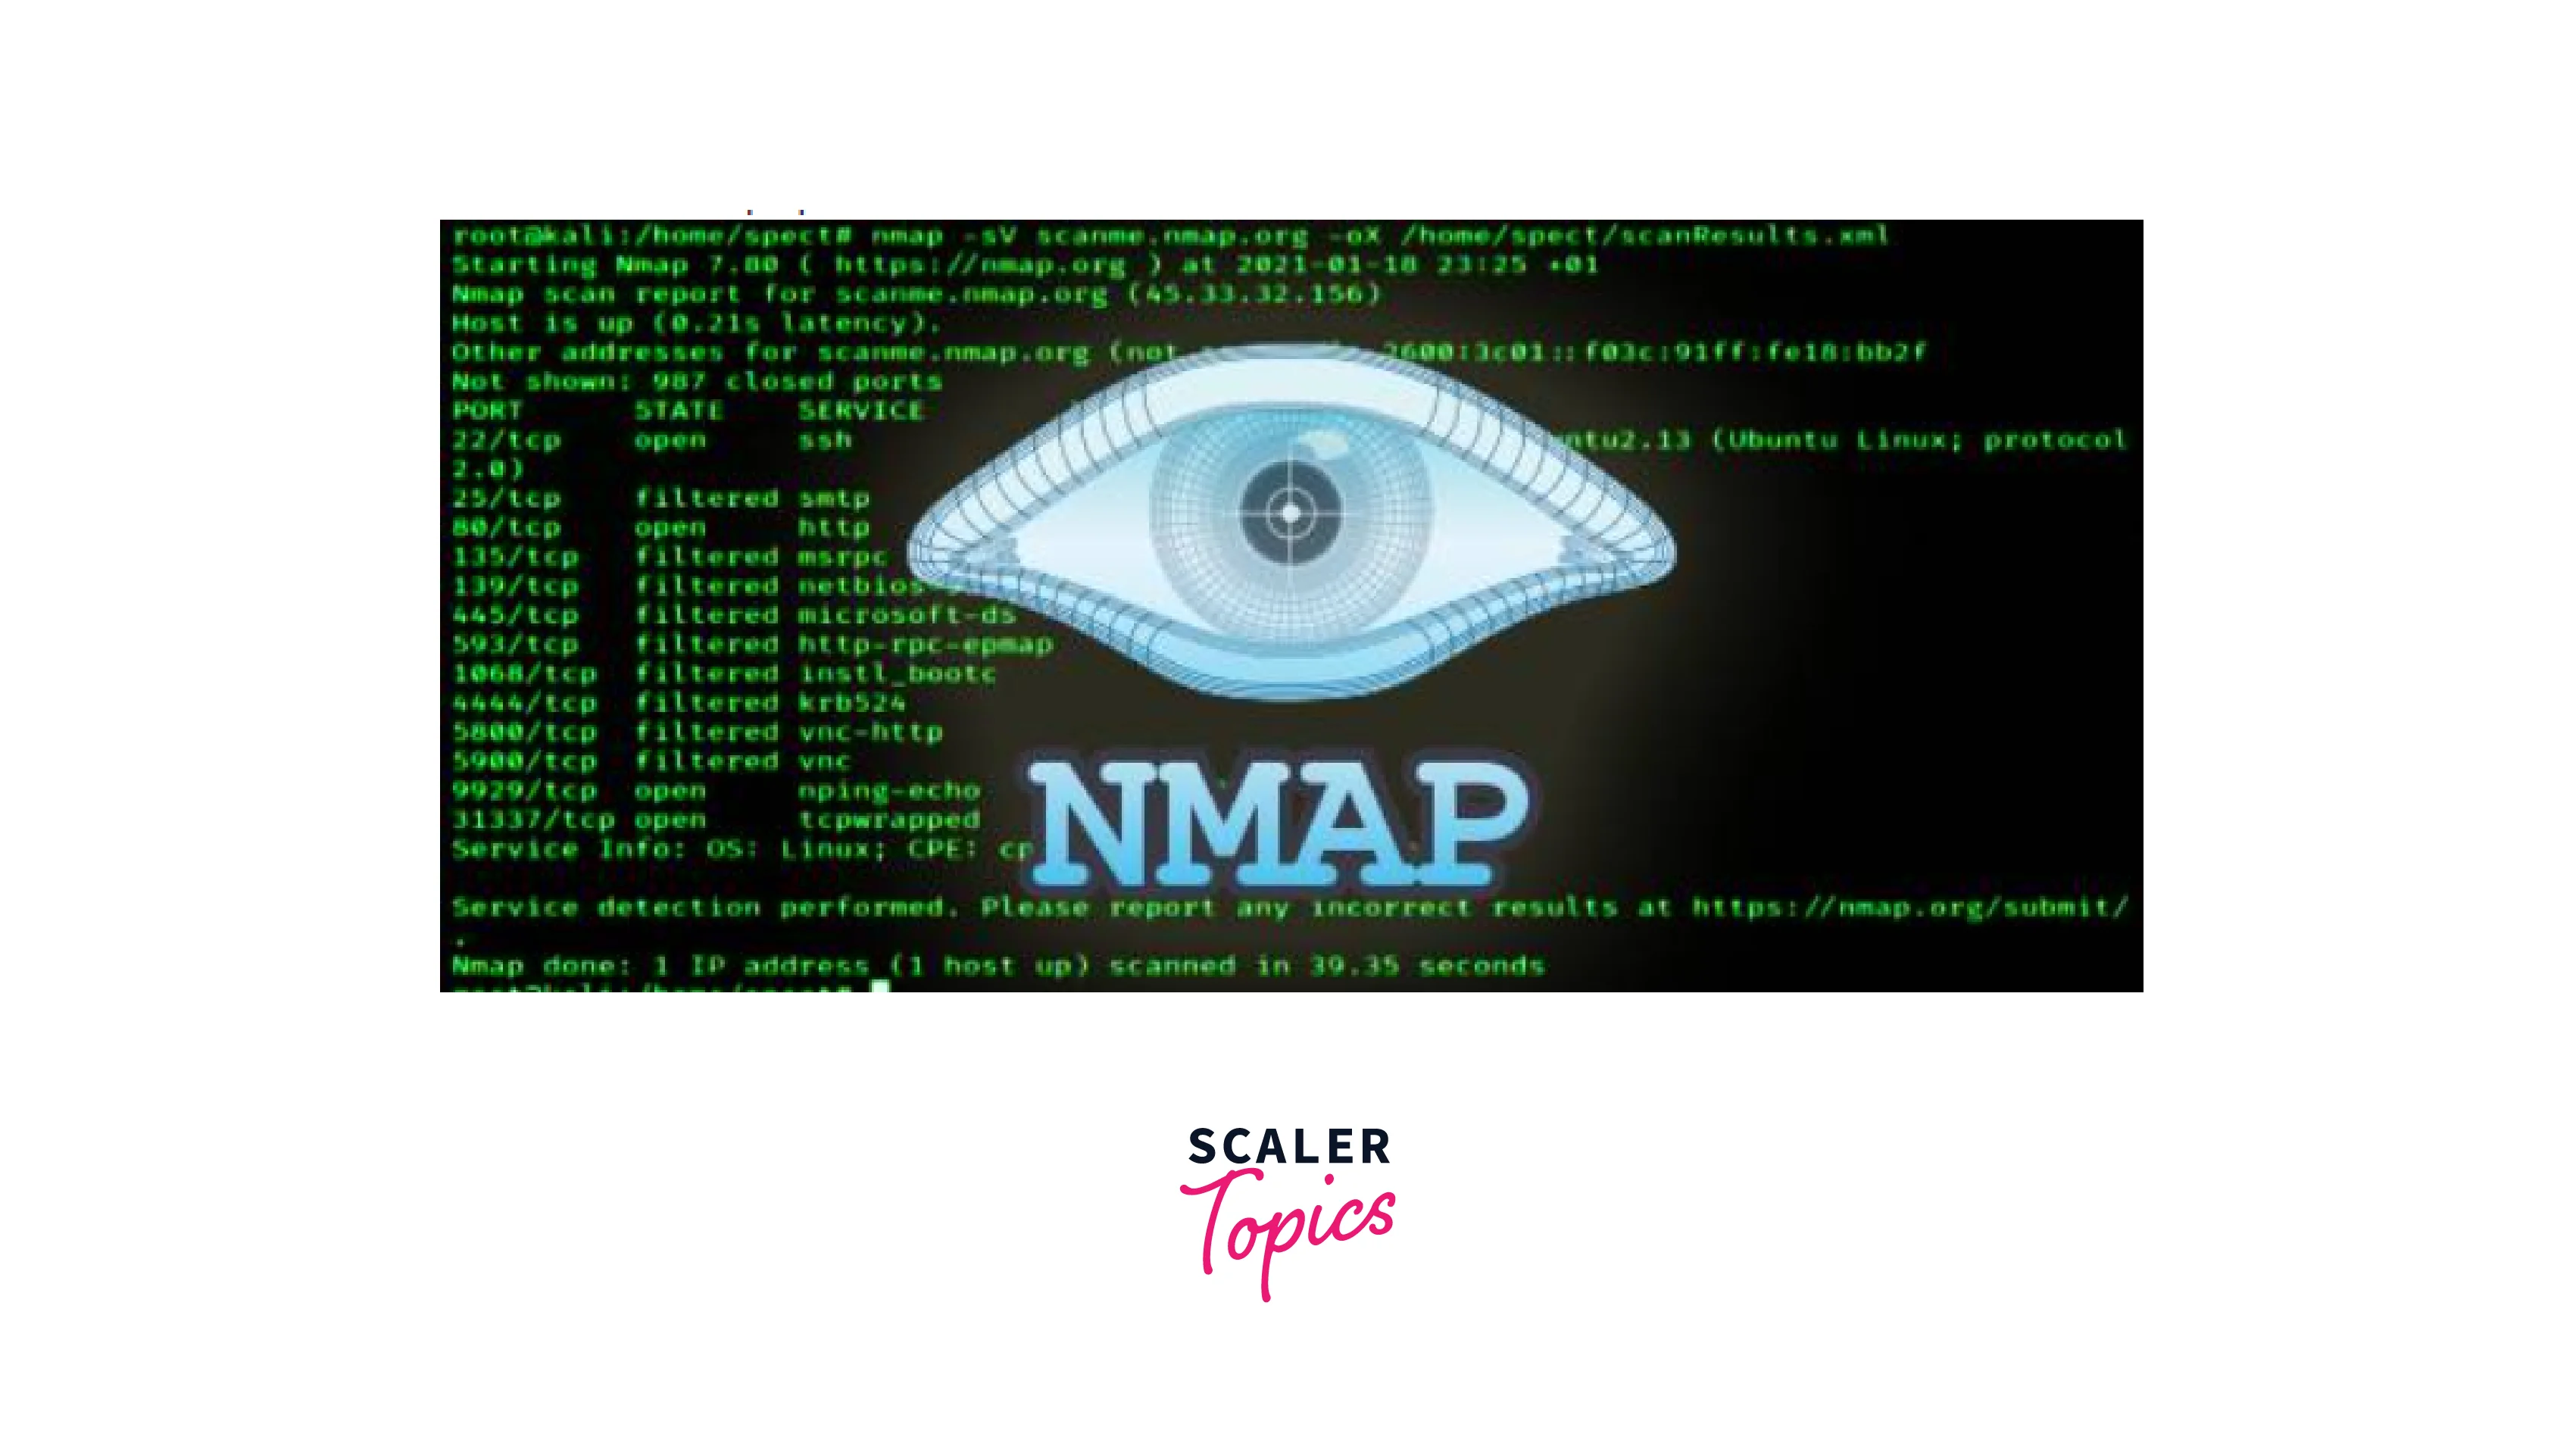 Filtering ports with nmap